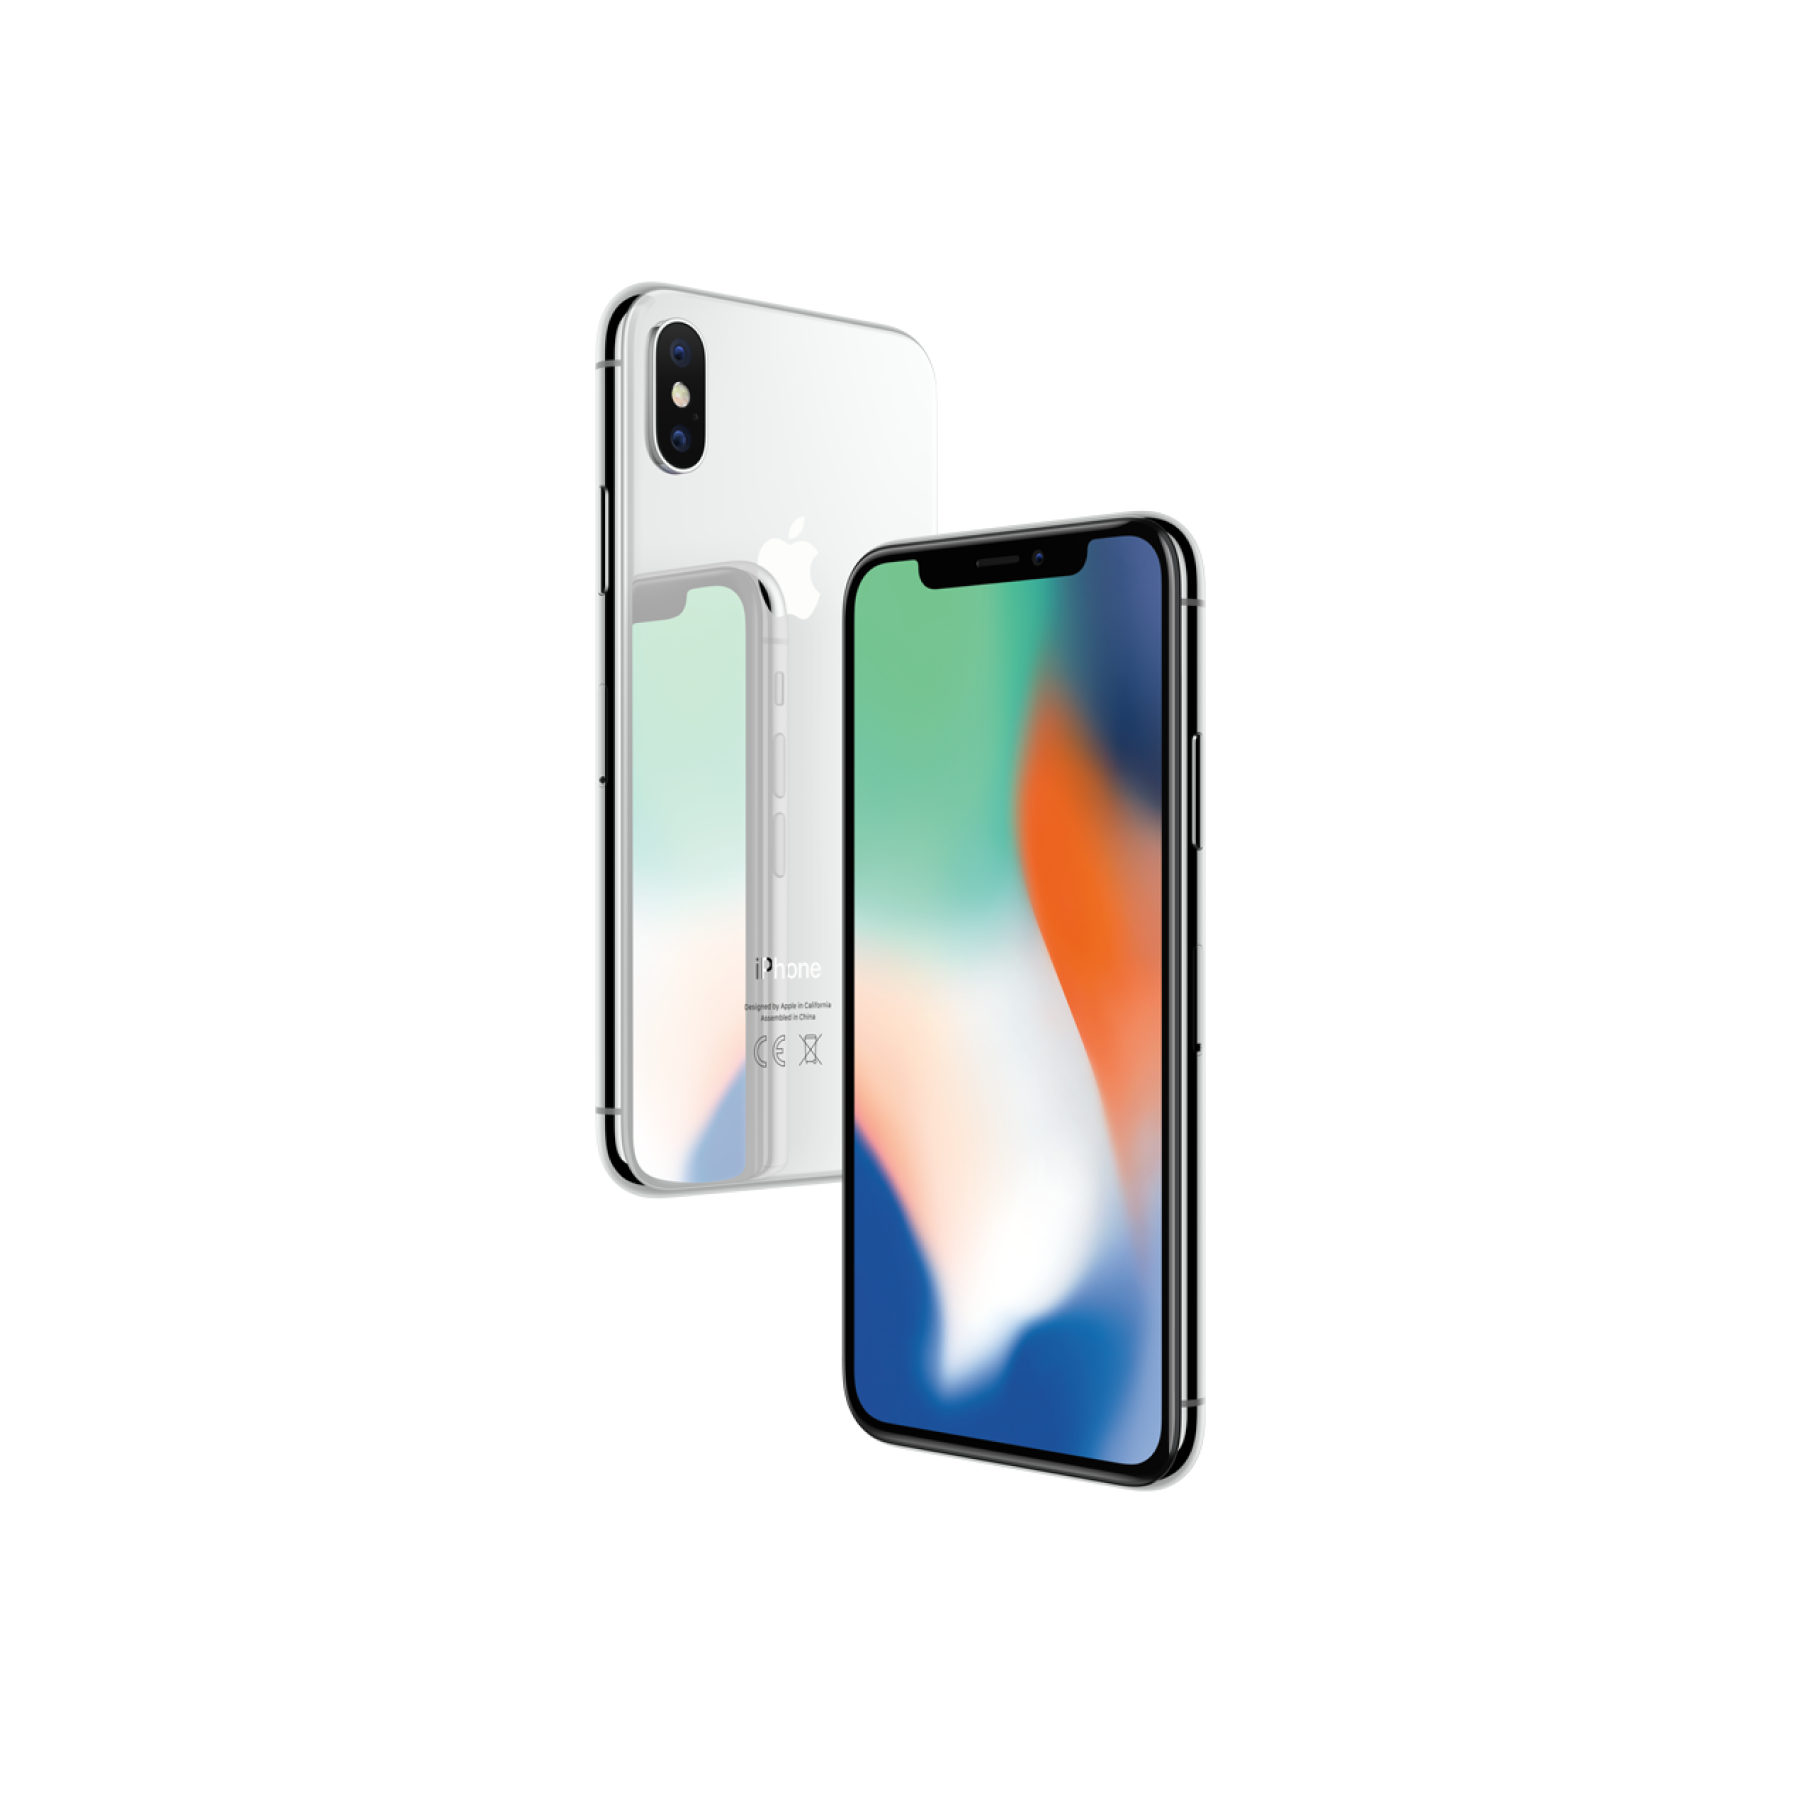 iPhone X 256GB - Silver (Better)